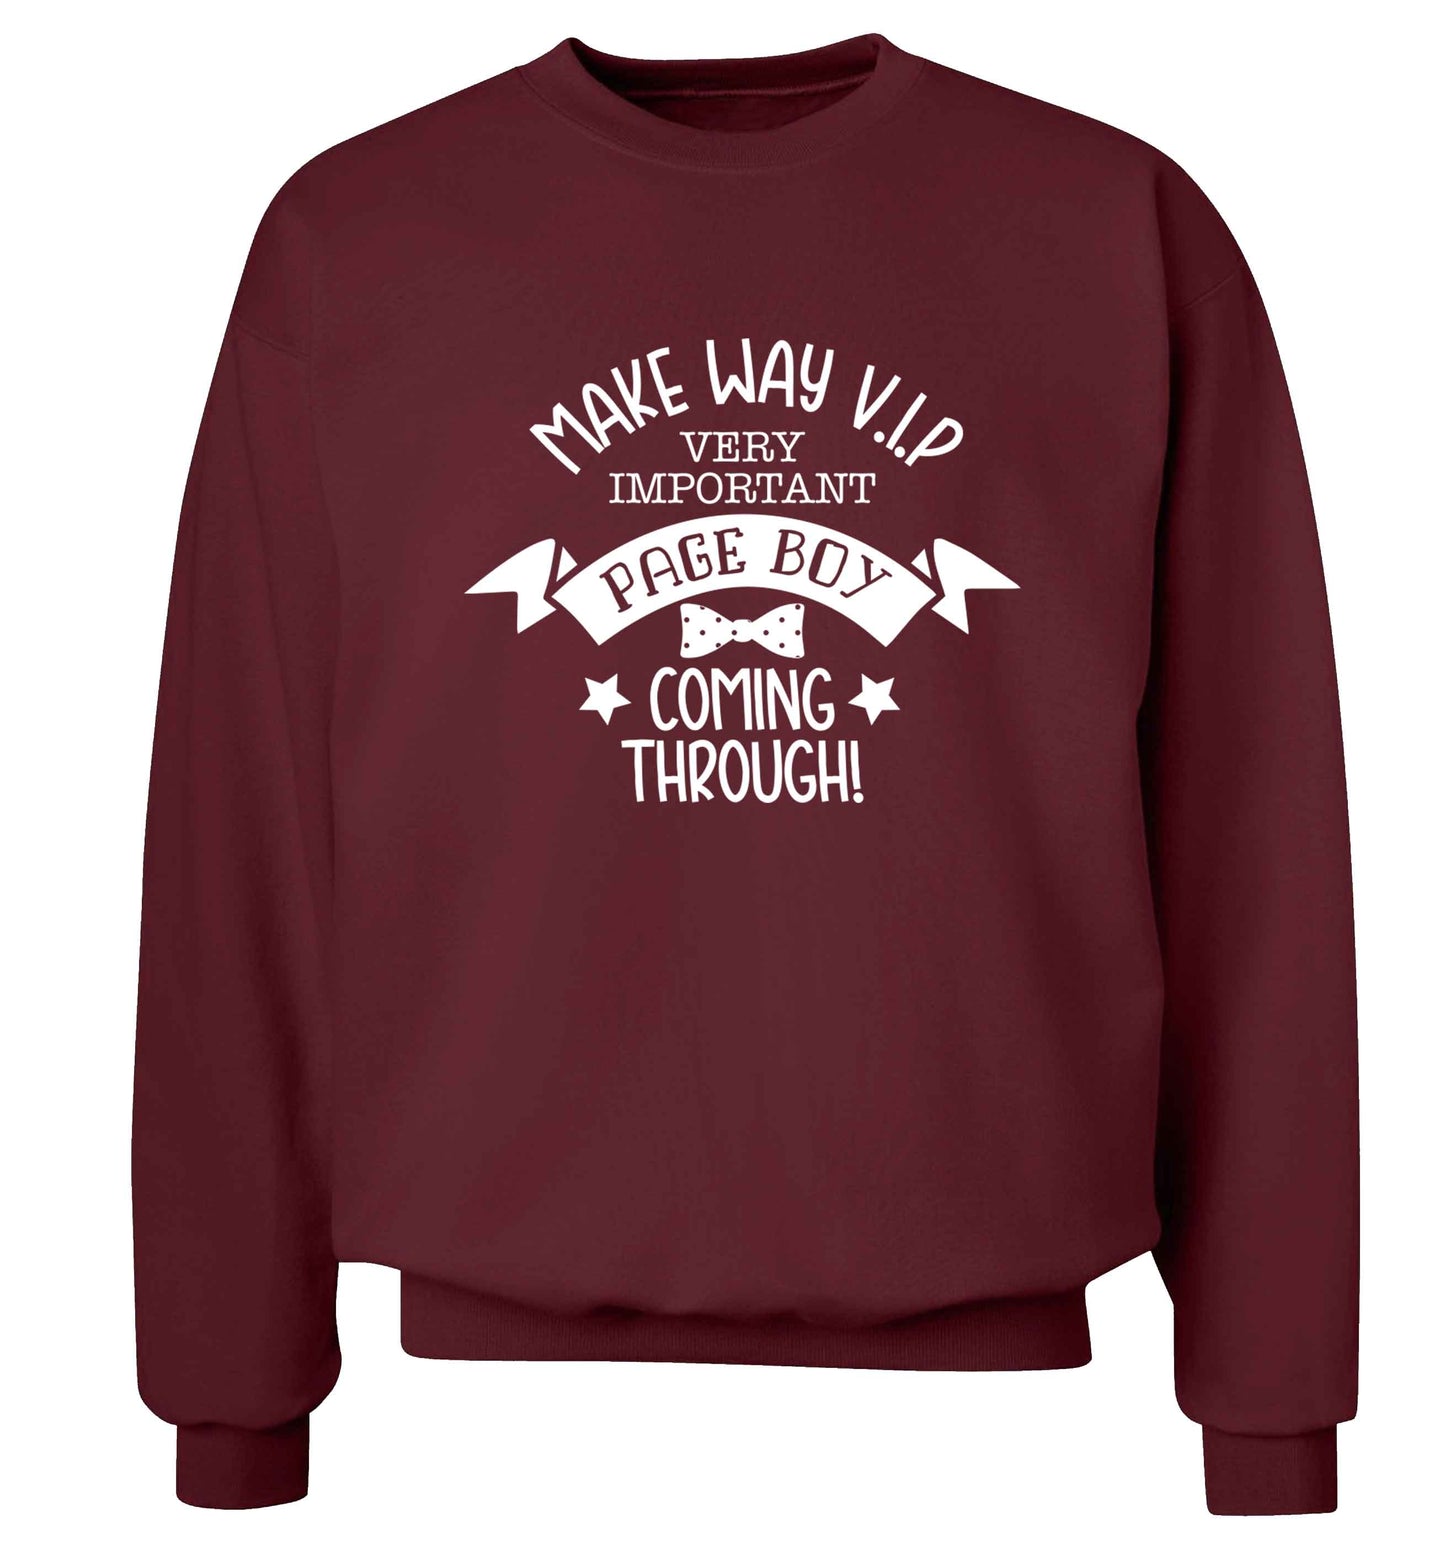 Make way V.I.P page boy coming through! Adult's unisex maroon Sweater 2XL